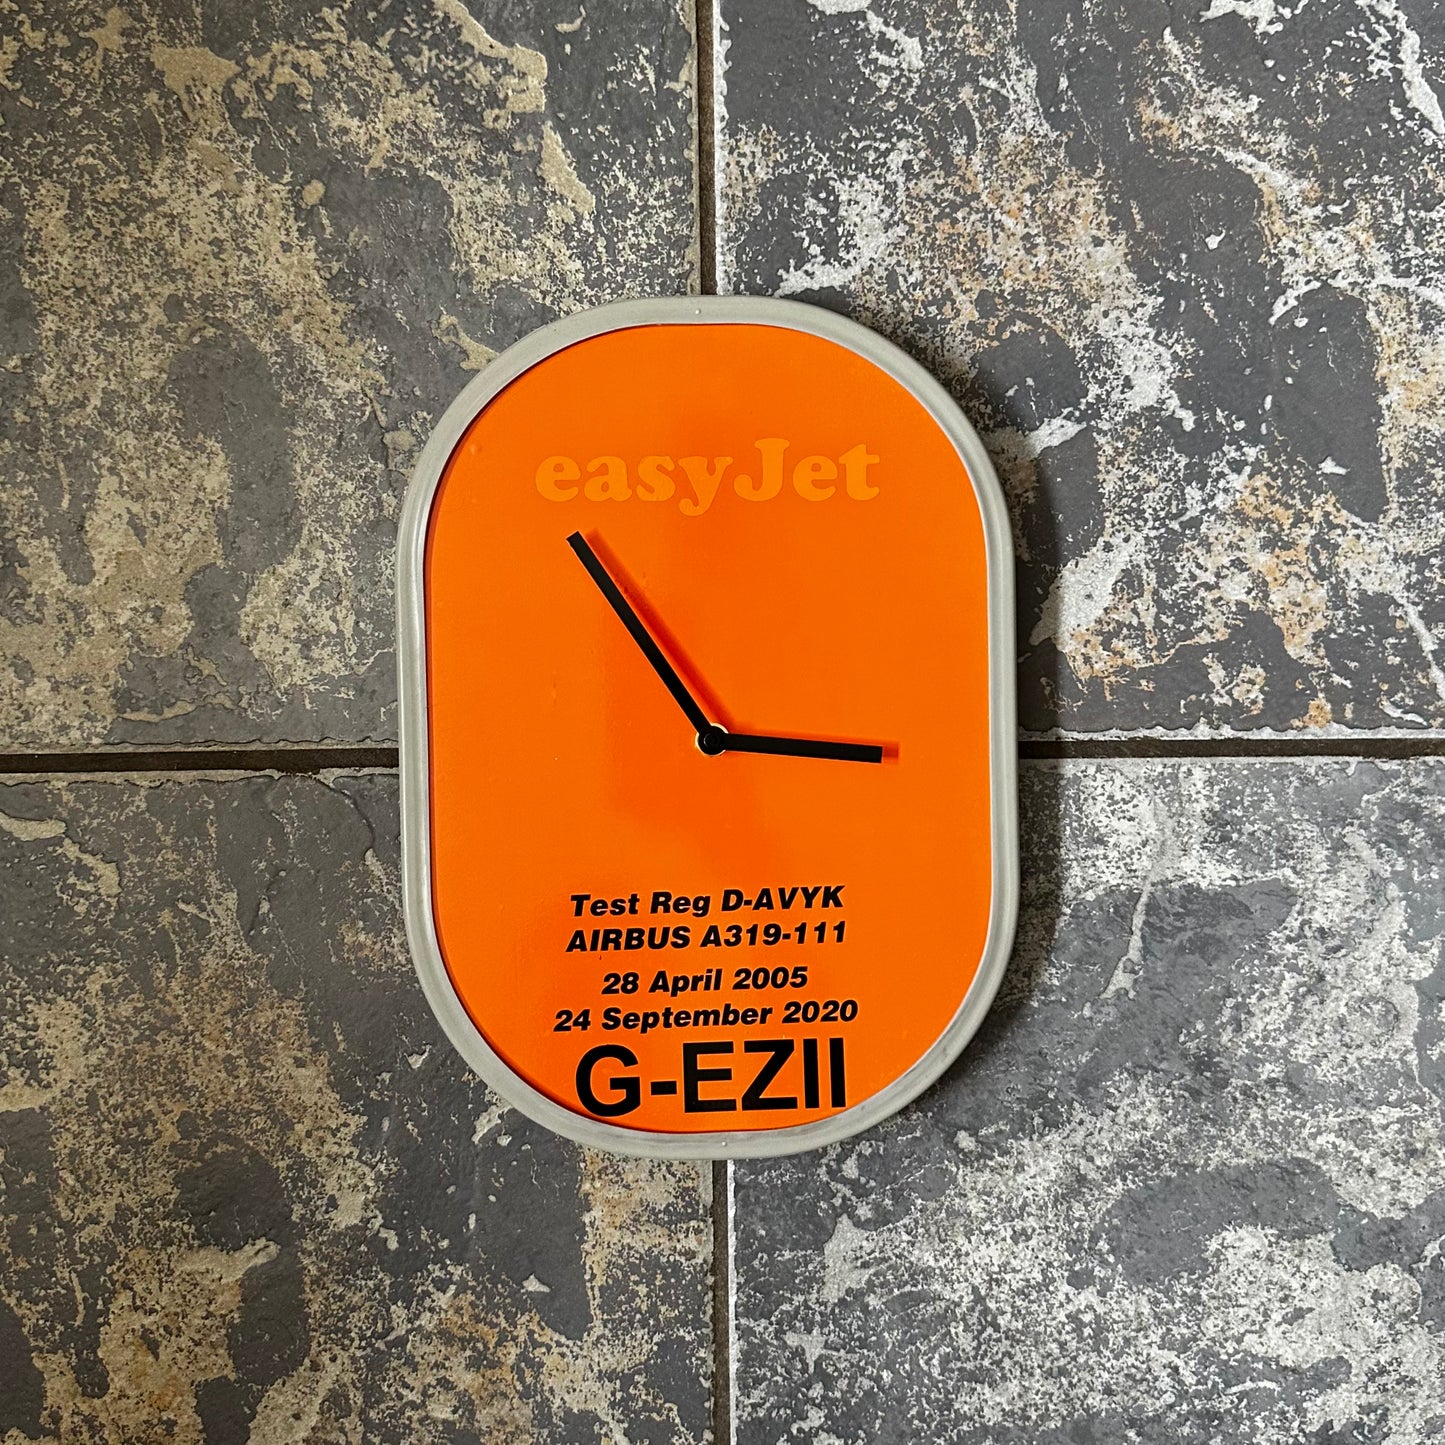 EASYJET AIRLINES G-EZII Airbus A319 Window Clock